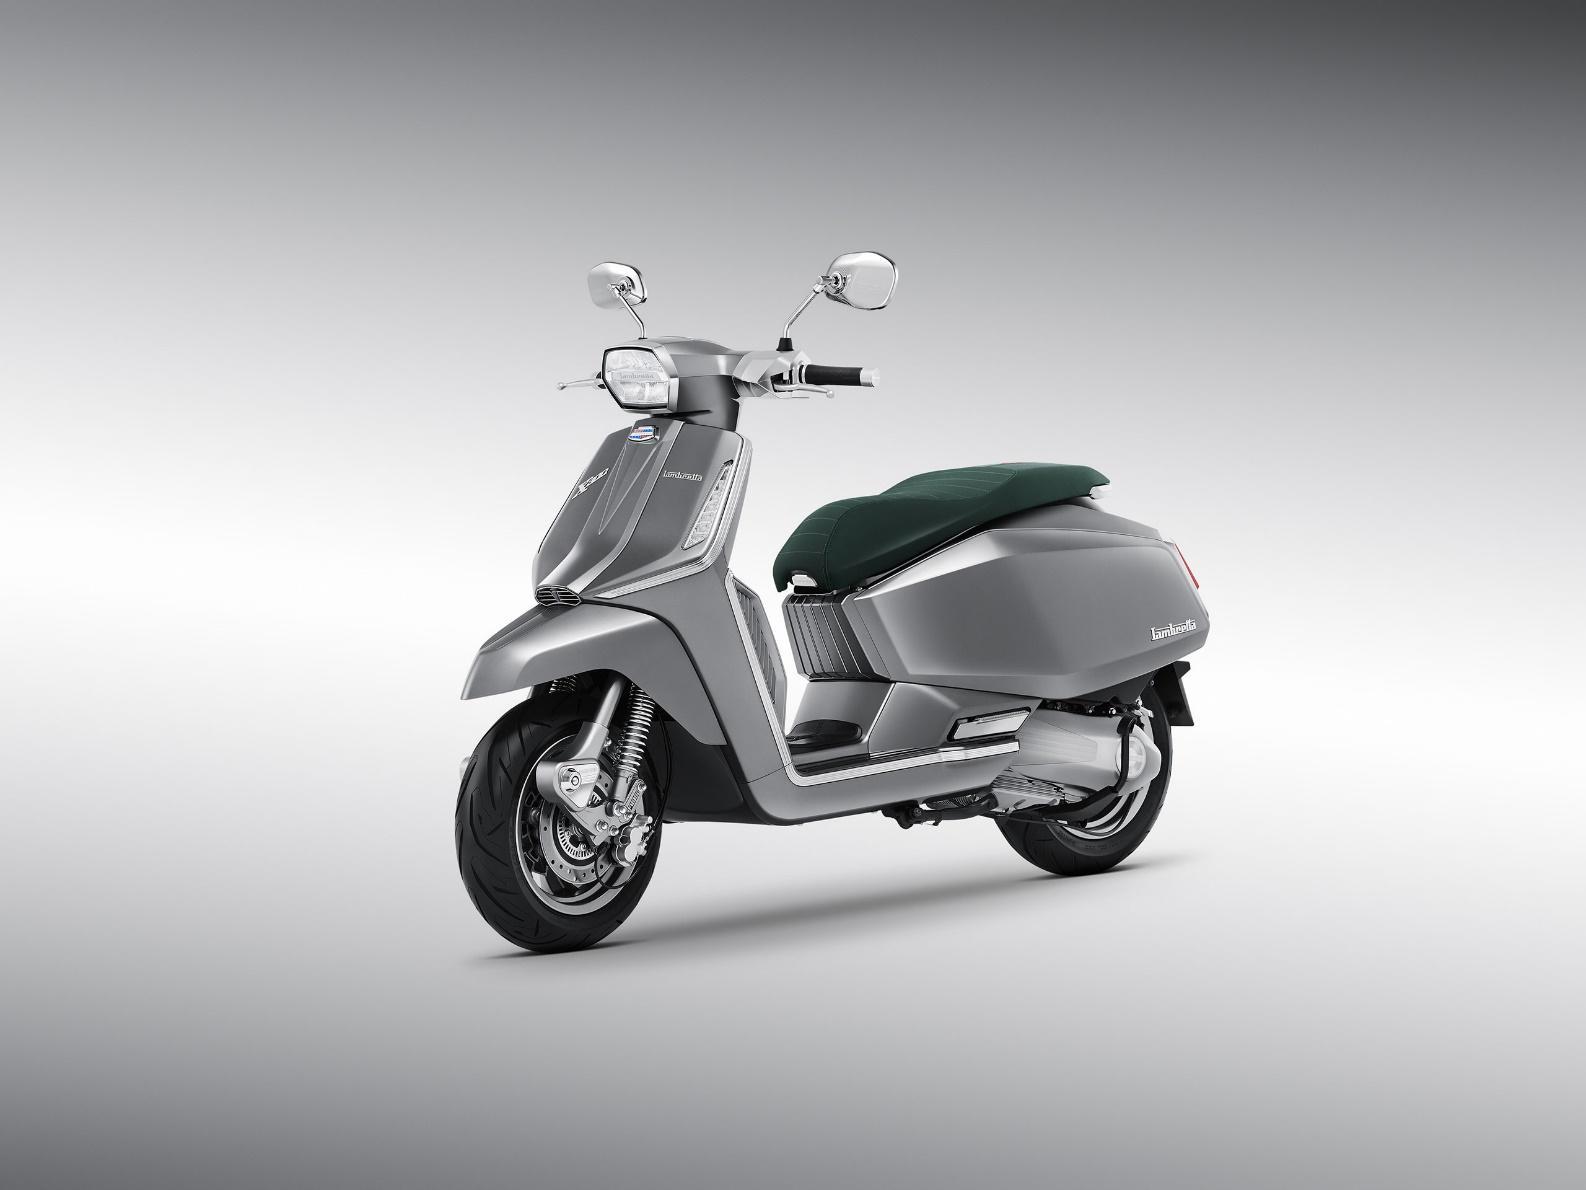 A silver scooter with a green seat
Description automatically generated